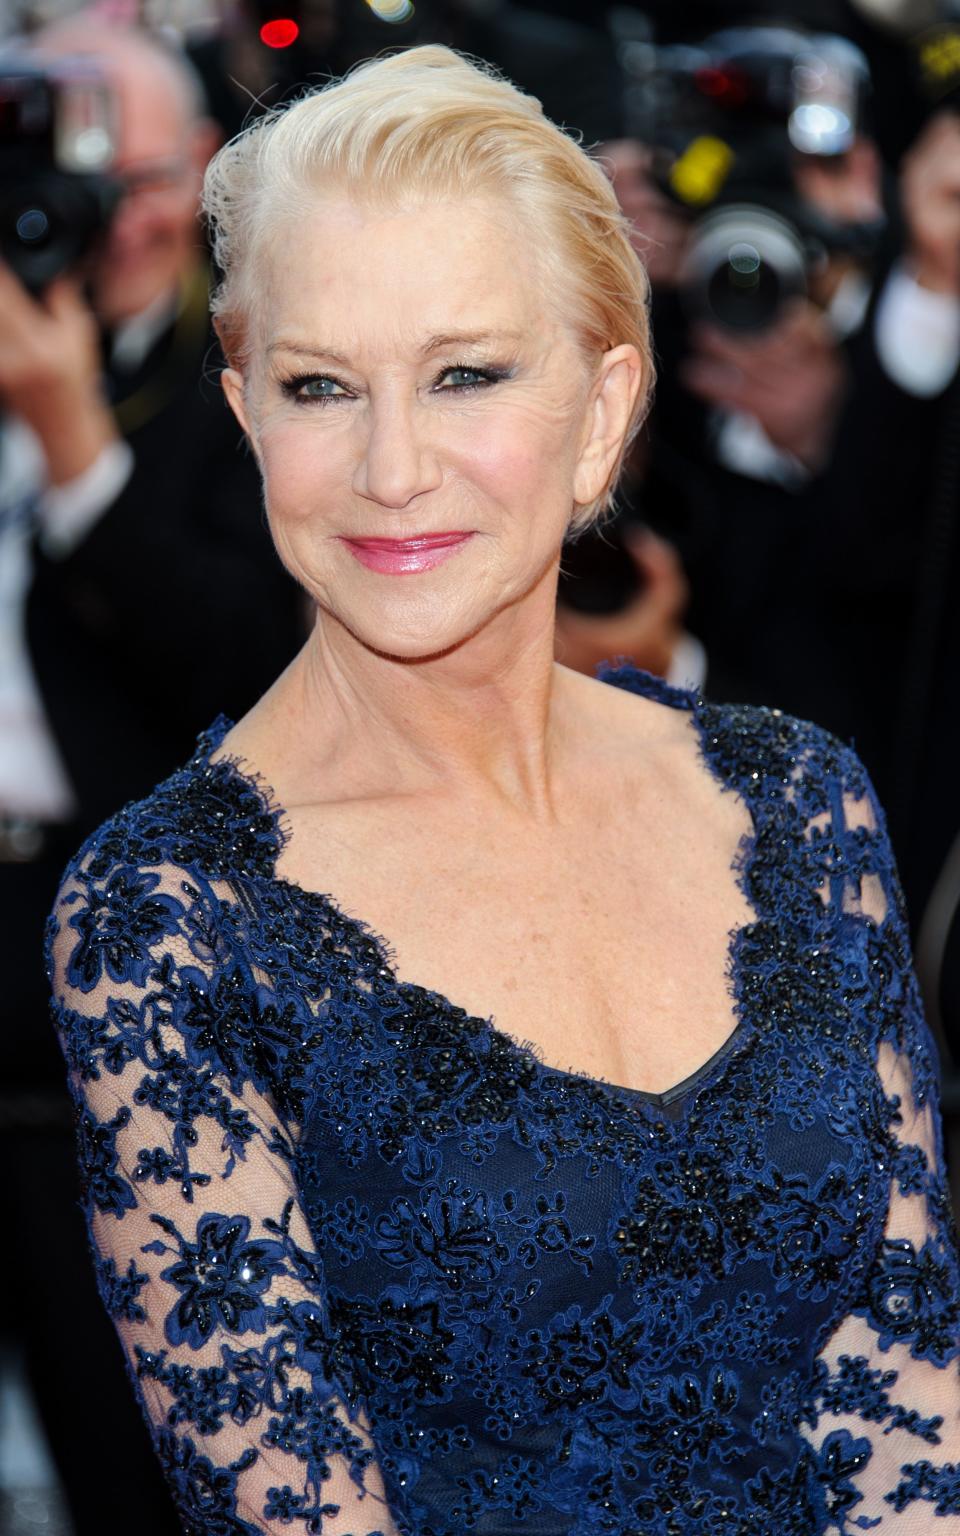 Mirren gave her lace dress modern edge with slicked back hair in Cannes last year - Credit: Rex